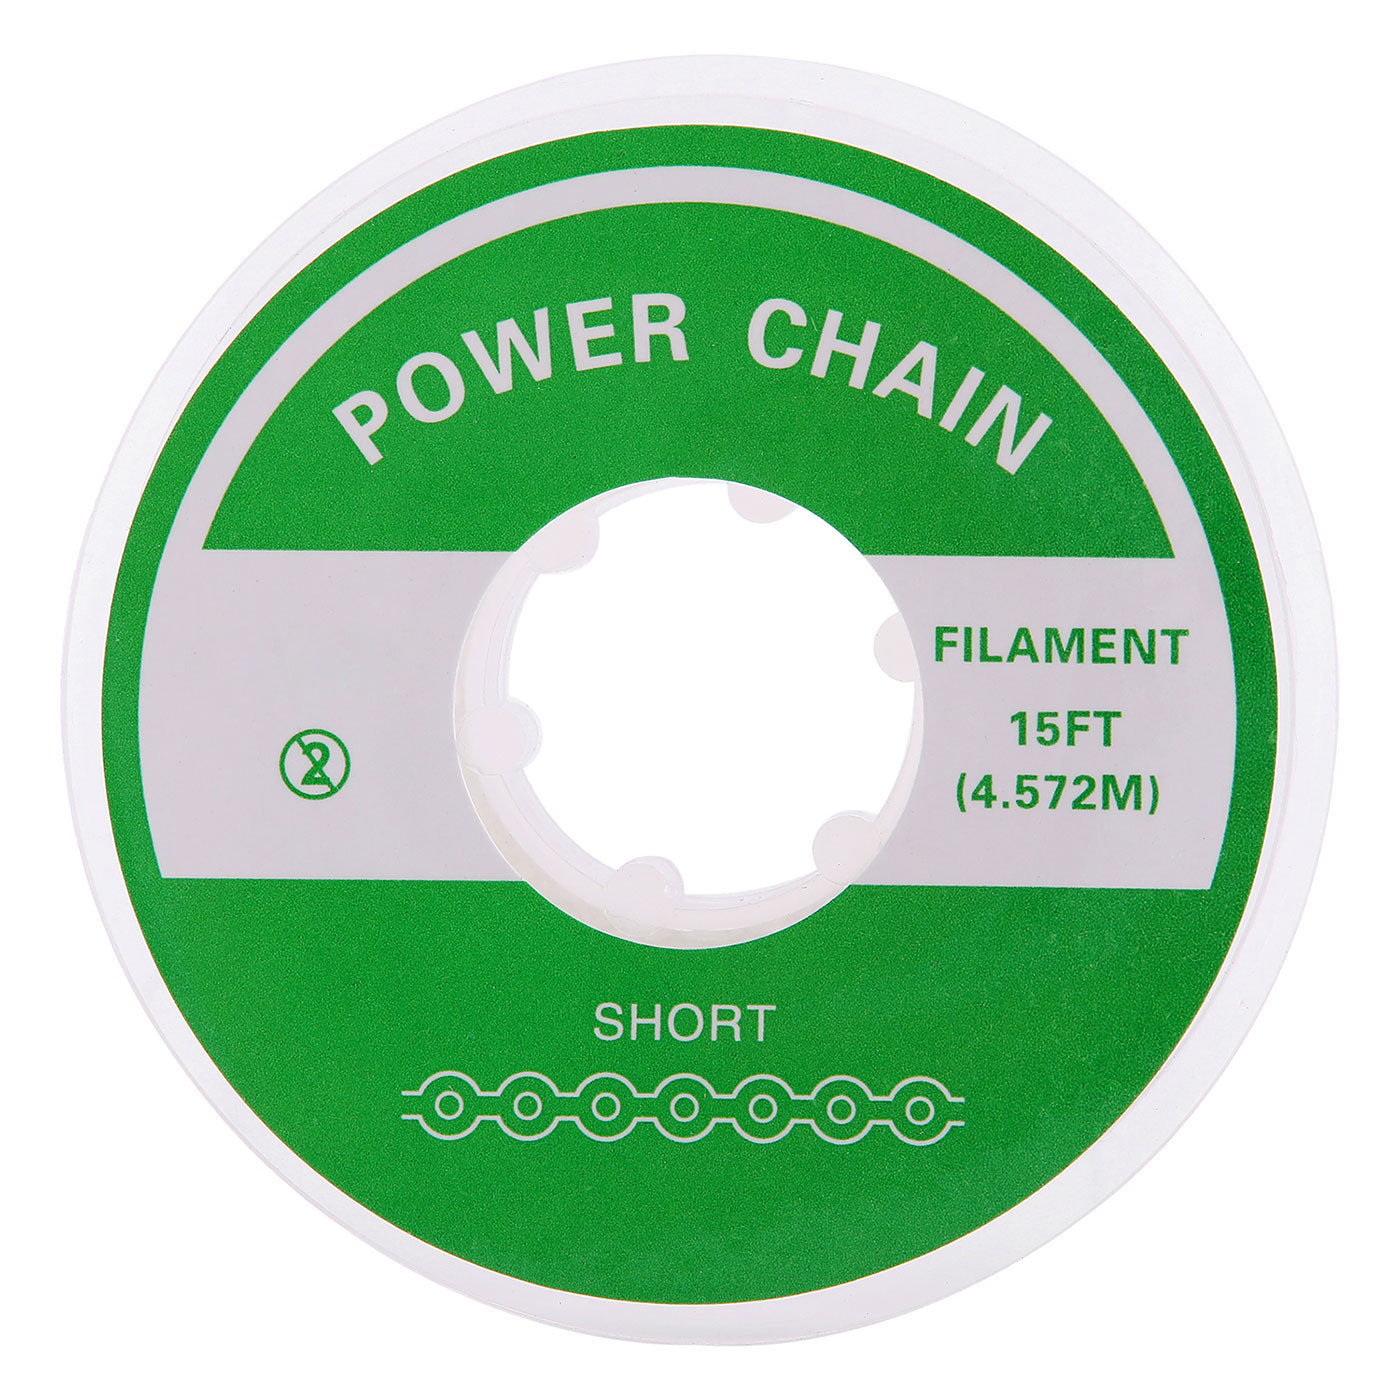 Dental Orthodontic Power Chain Continuous Clear  Color Long/Short/Continuous 15 ft/Roll - azdentall.com